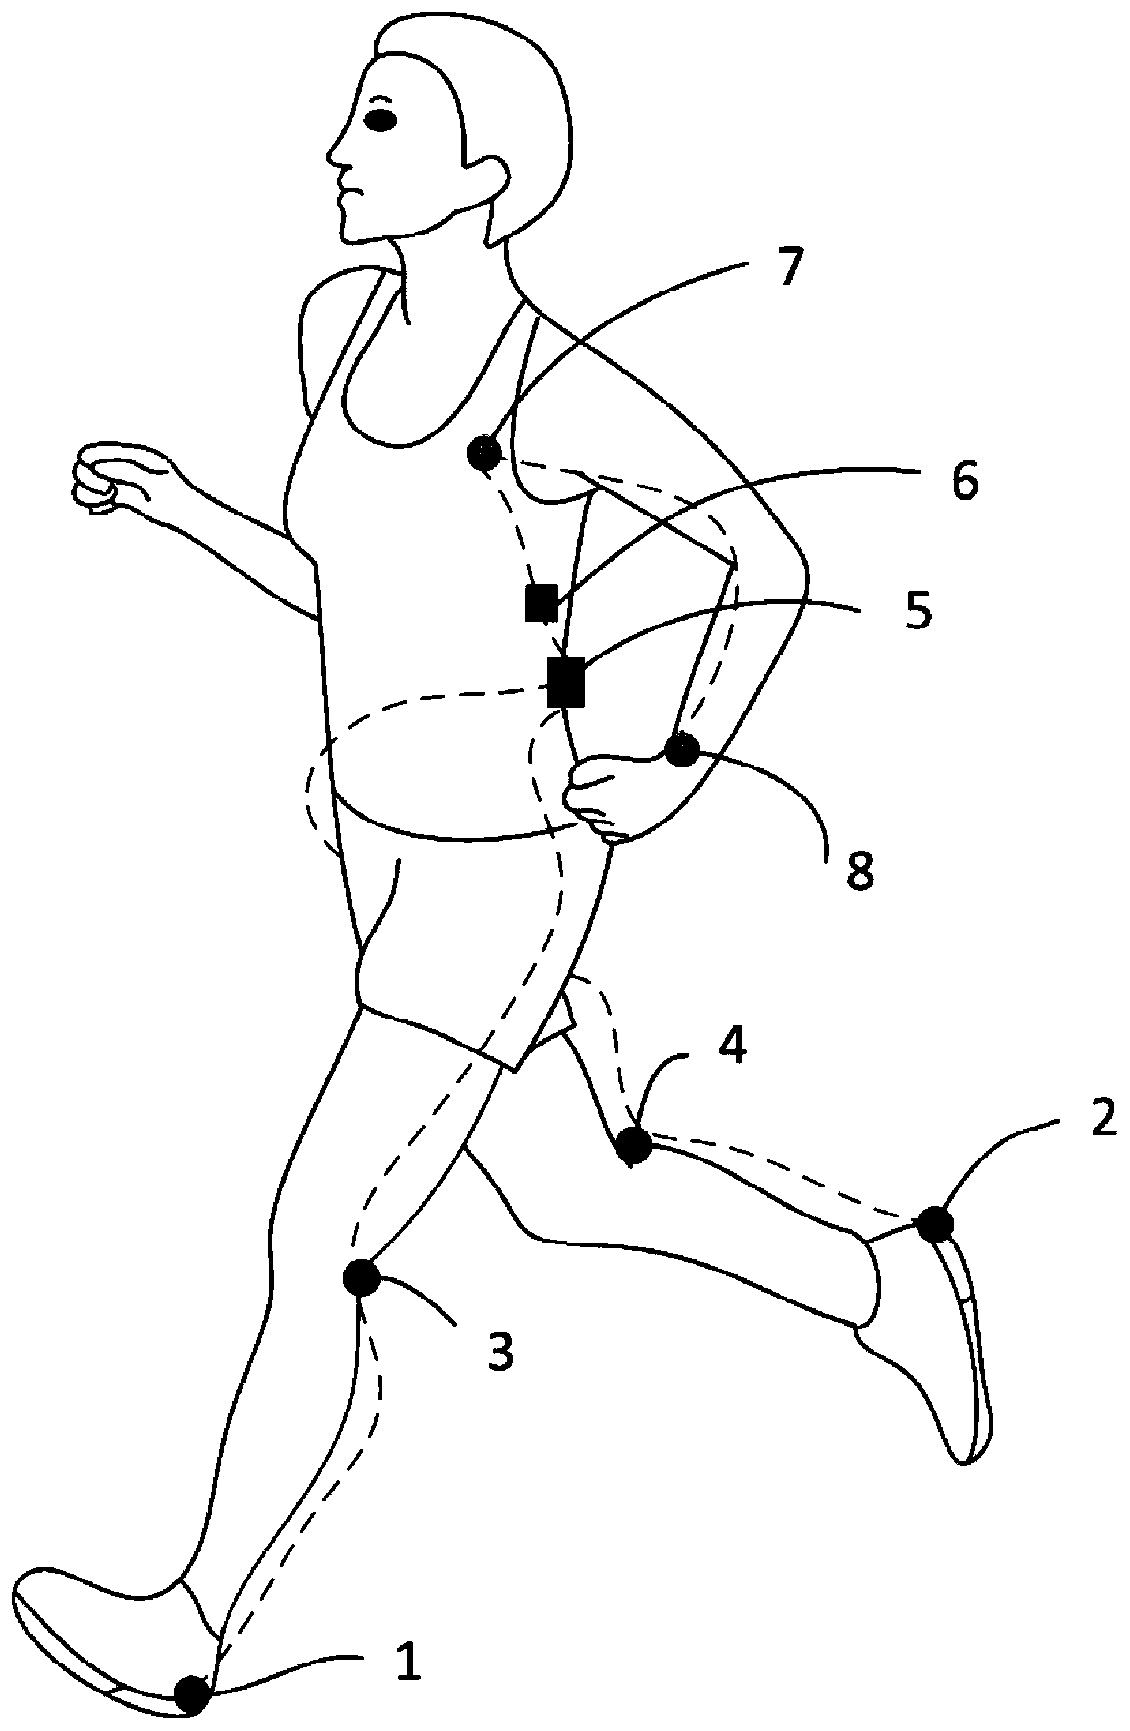 Human body motion energy harvesting-based heart rate measurement device and measurement method